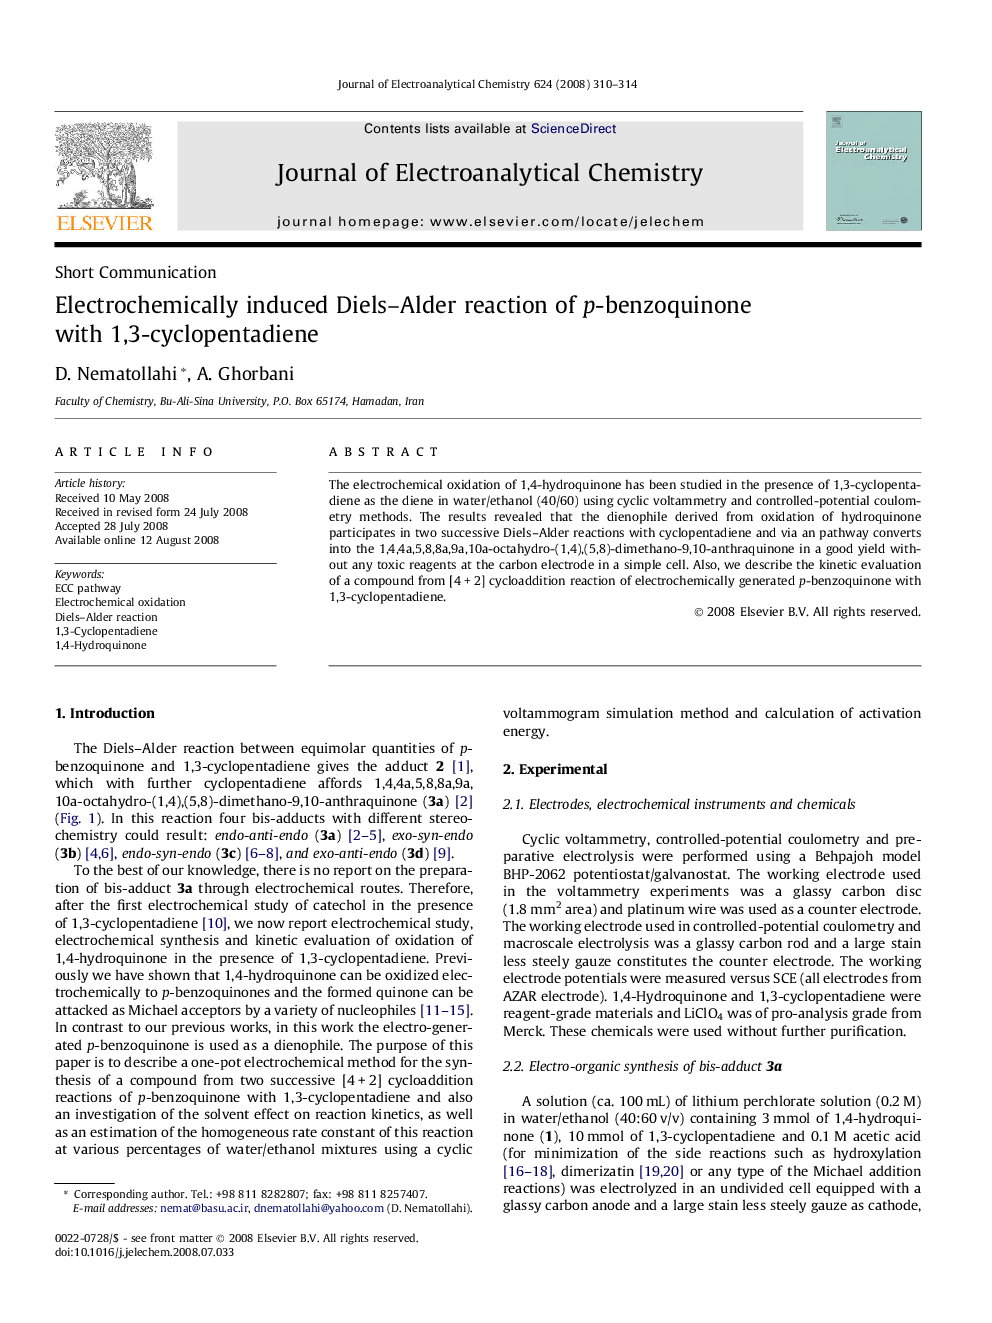 Electrochemically induced Diels–Alder reaction of p-benzoquinone with 1,3-cyclopentadiene